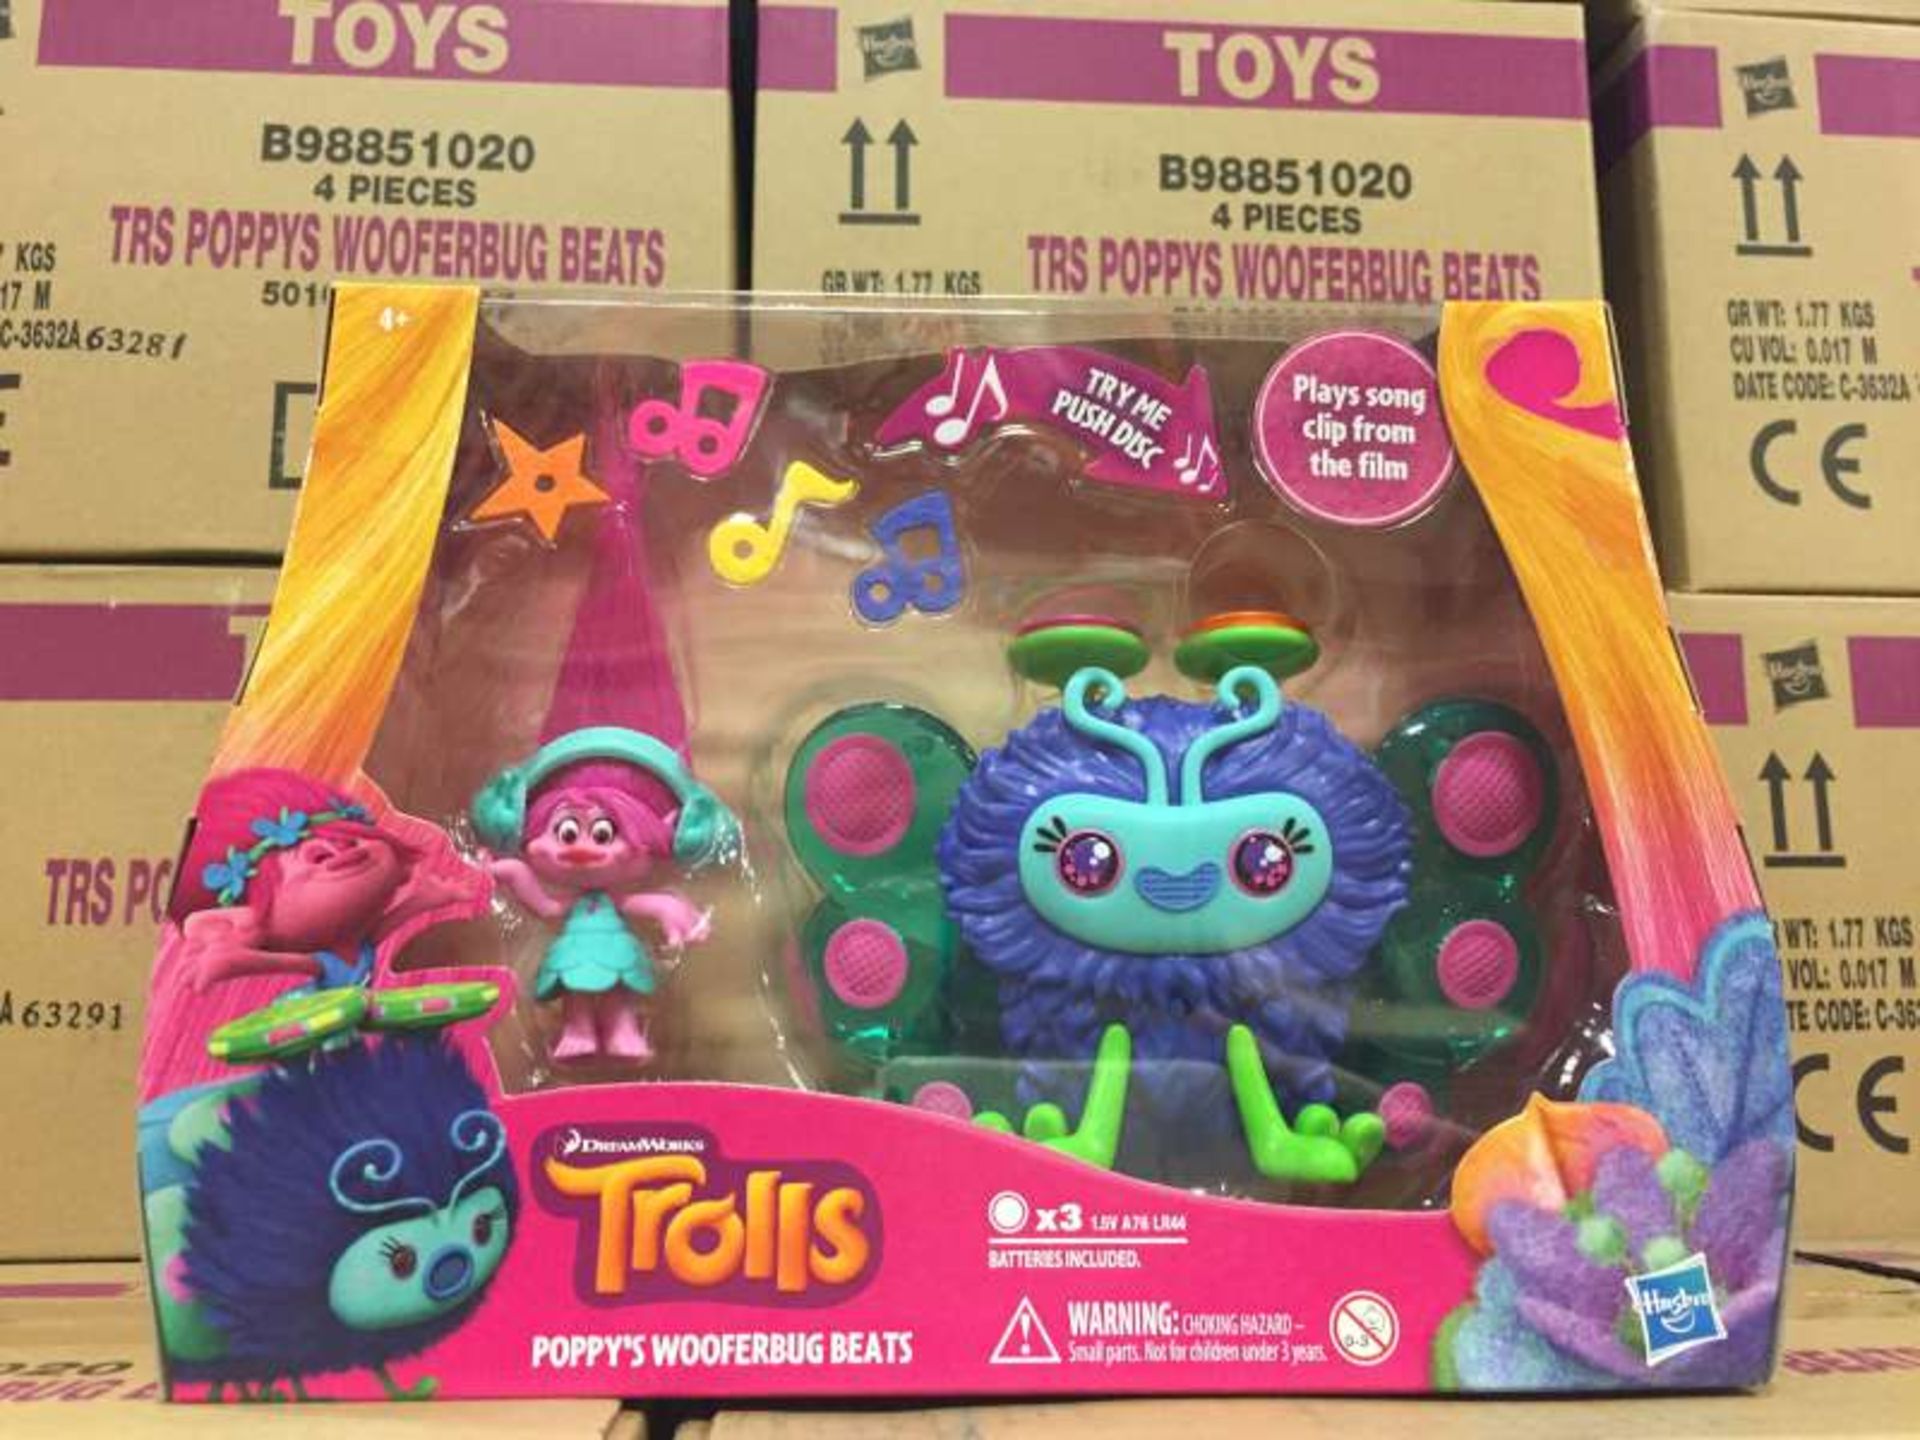 16 X BRAND NEW BOXED DREAM WORKS TROLLS POPPYS WOOFERBUG BEATS IN 4 BOXES